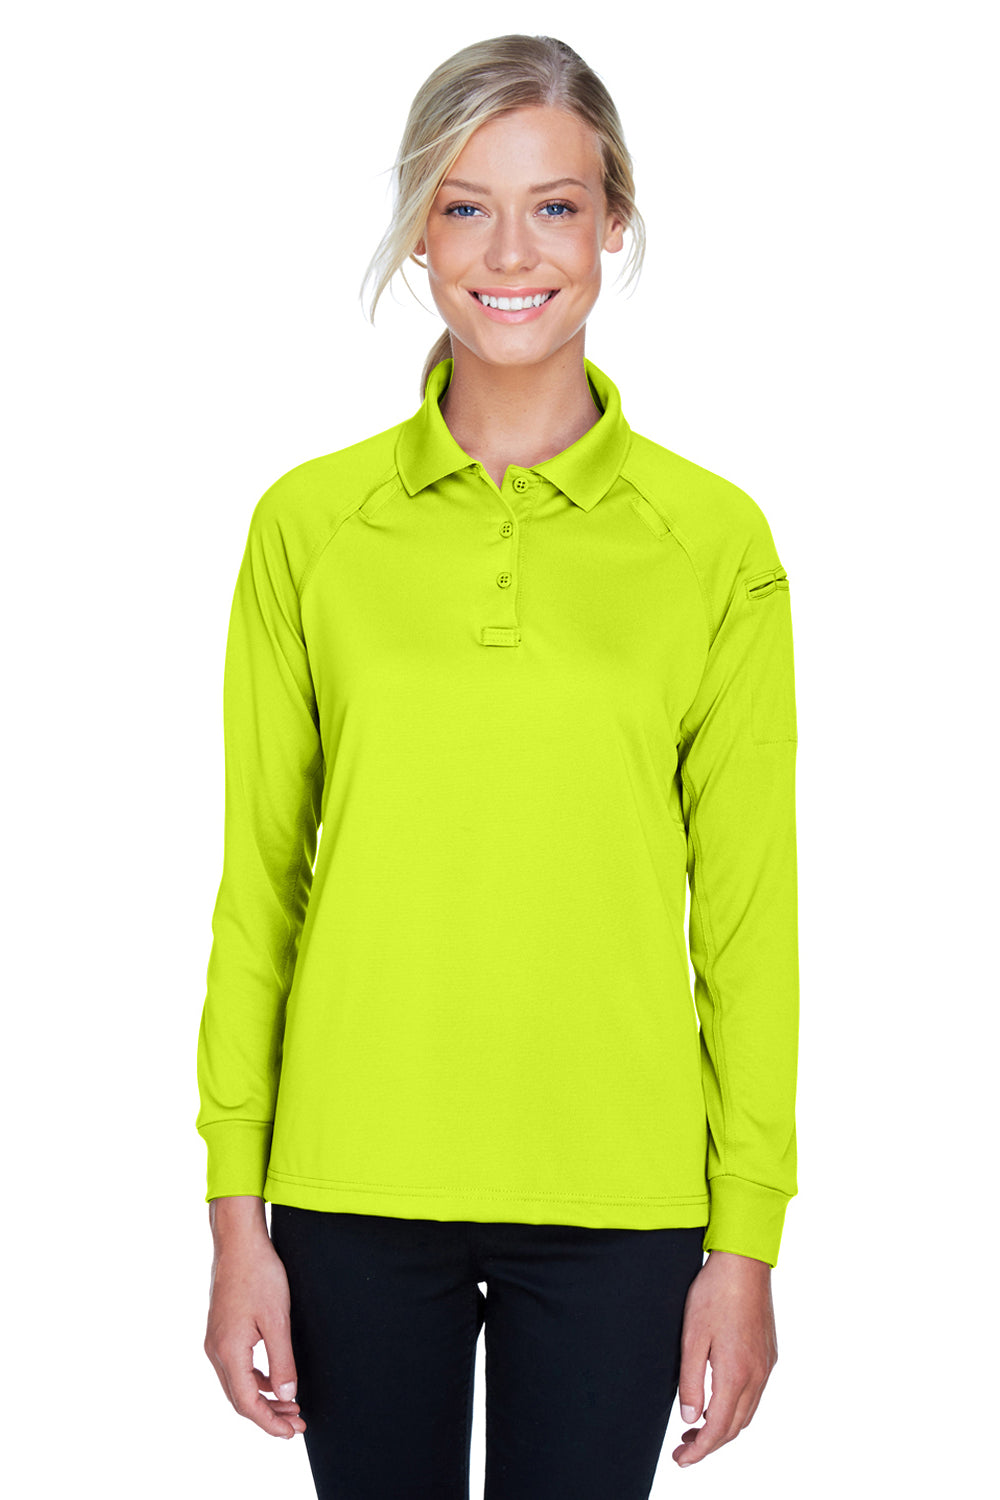 Harriton M211LW Womens Advantage Tactical Moisture Wicking Long Sleeve Polo Shirt Safety Yellow Front